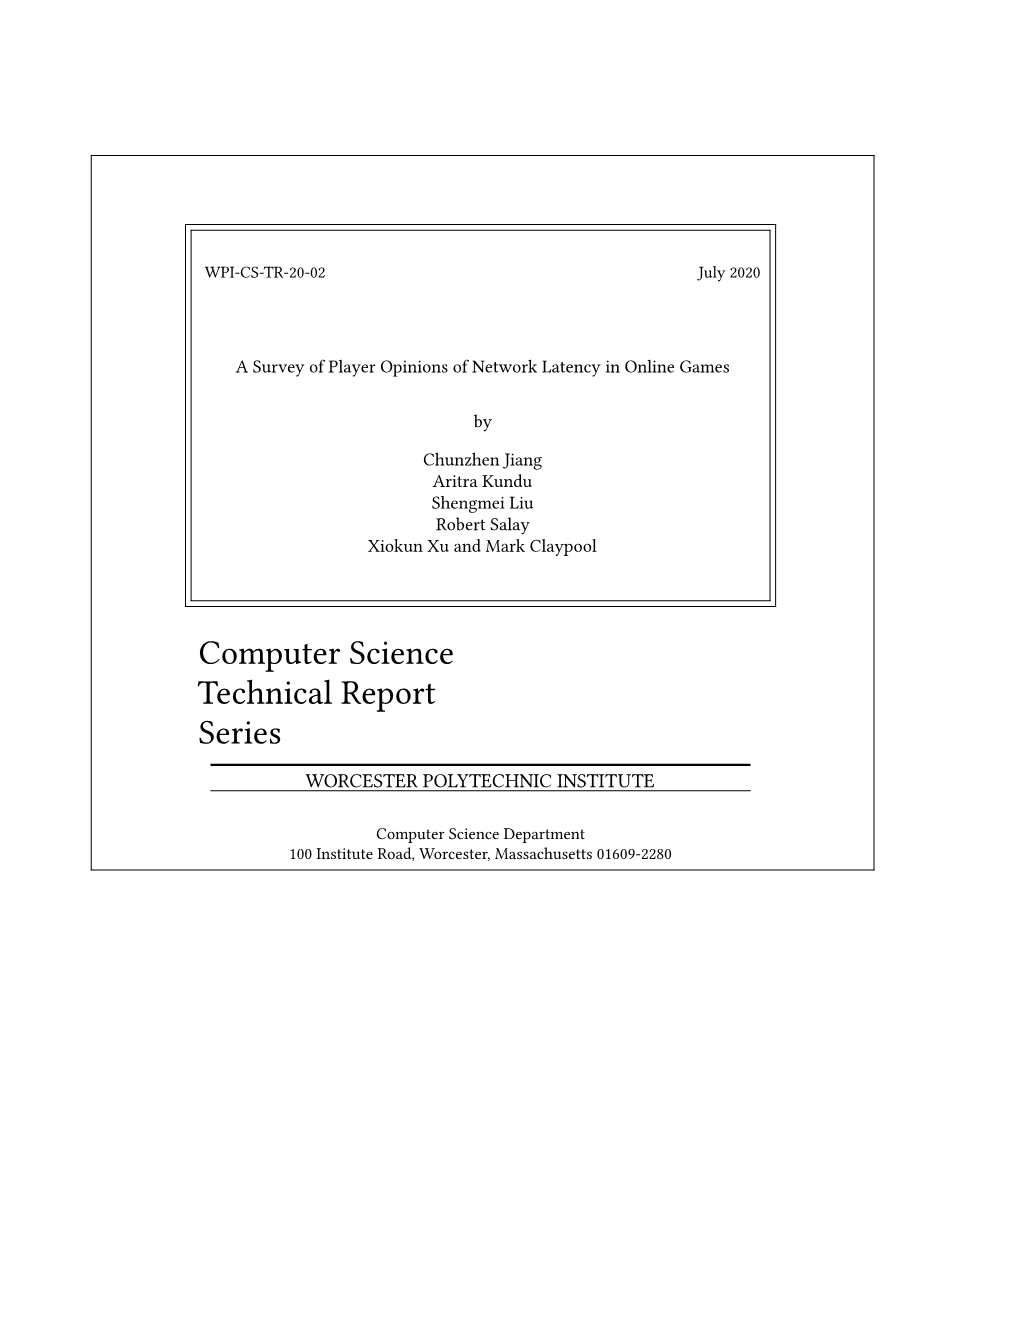 Computer Science Technical Report Series